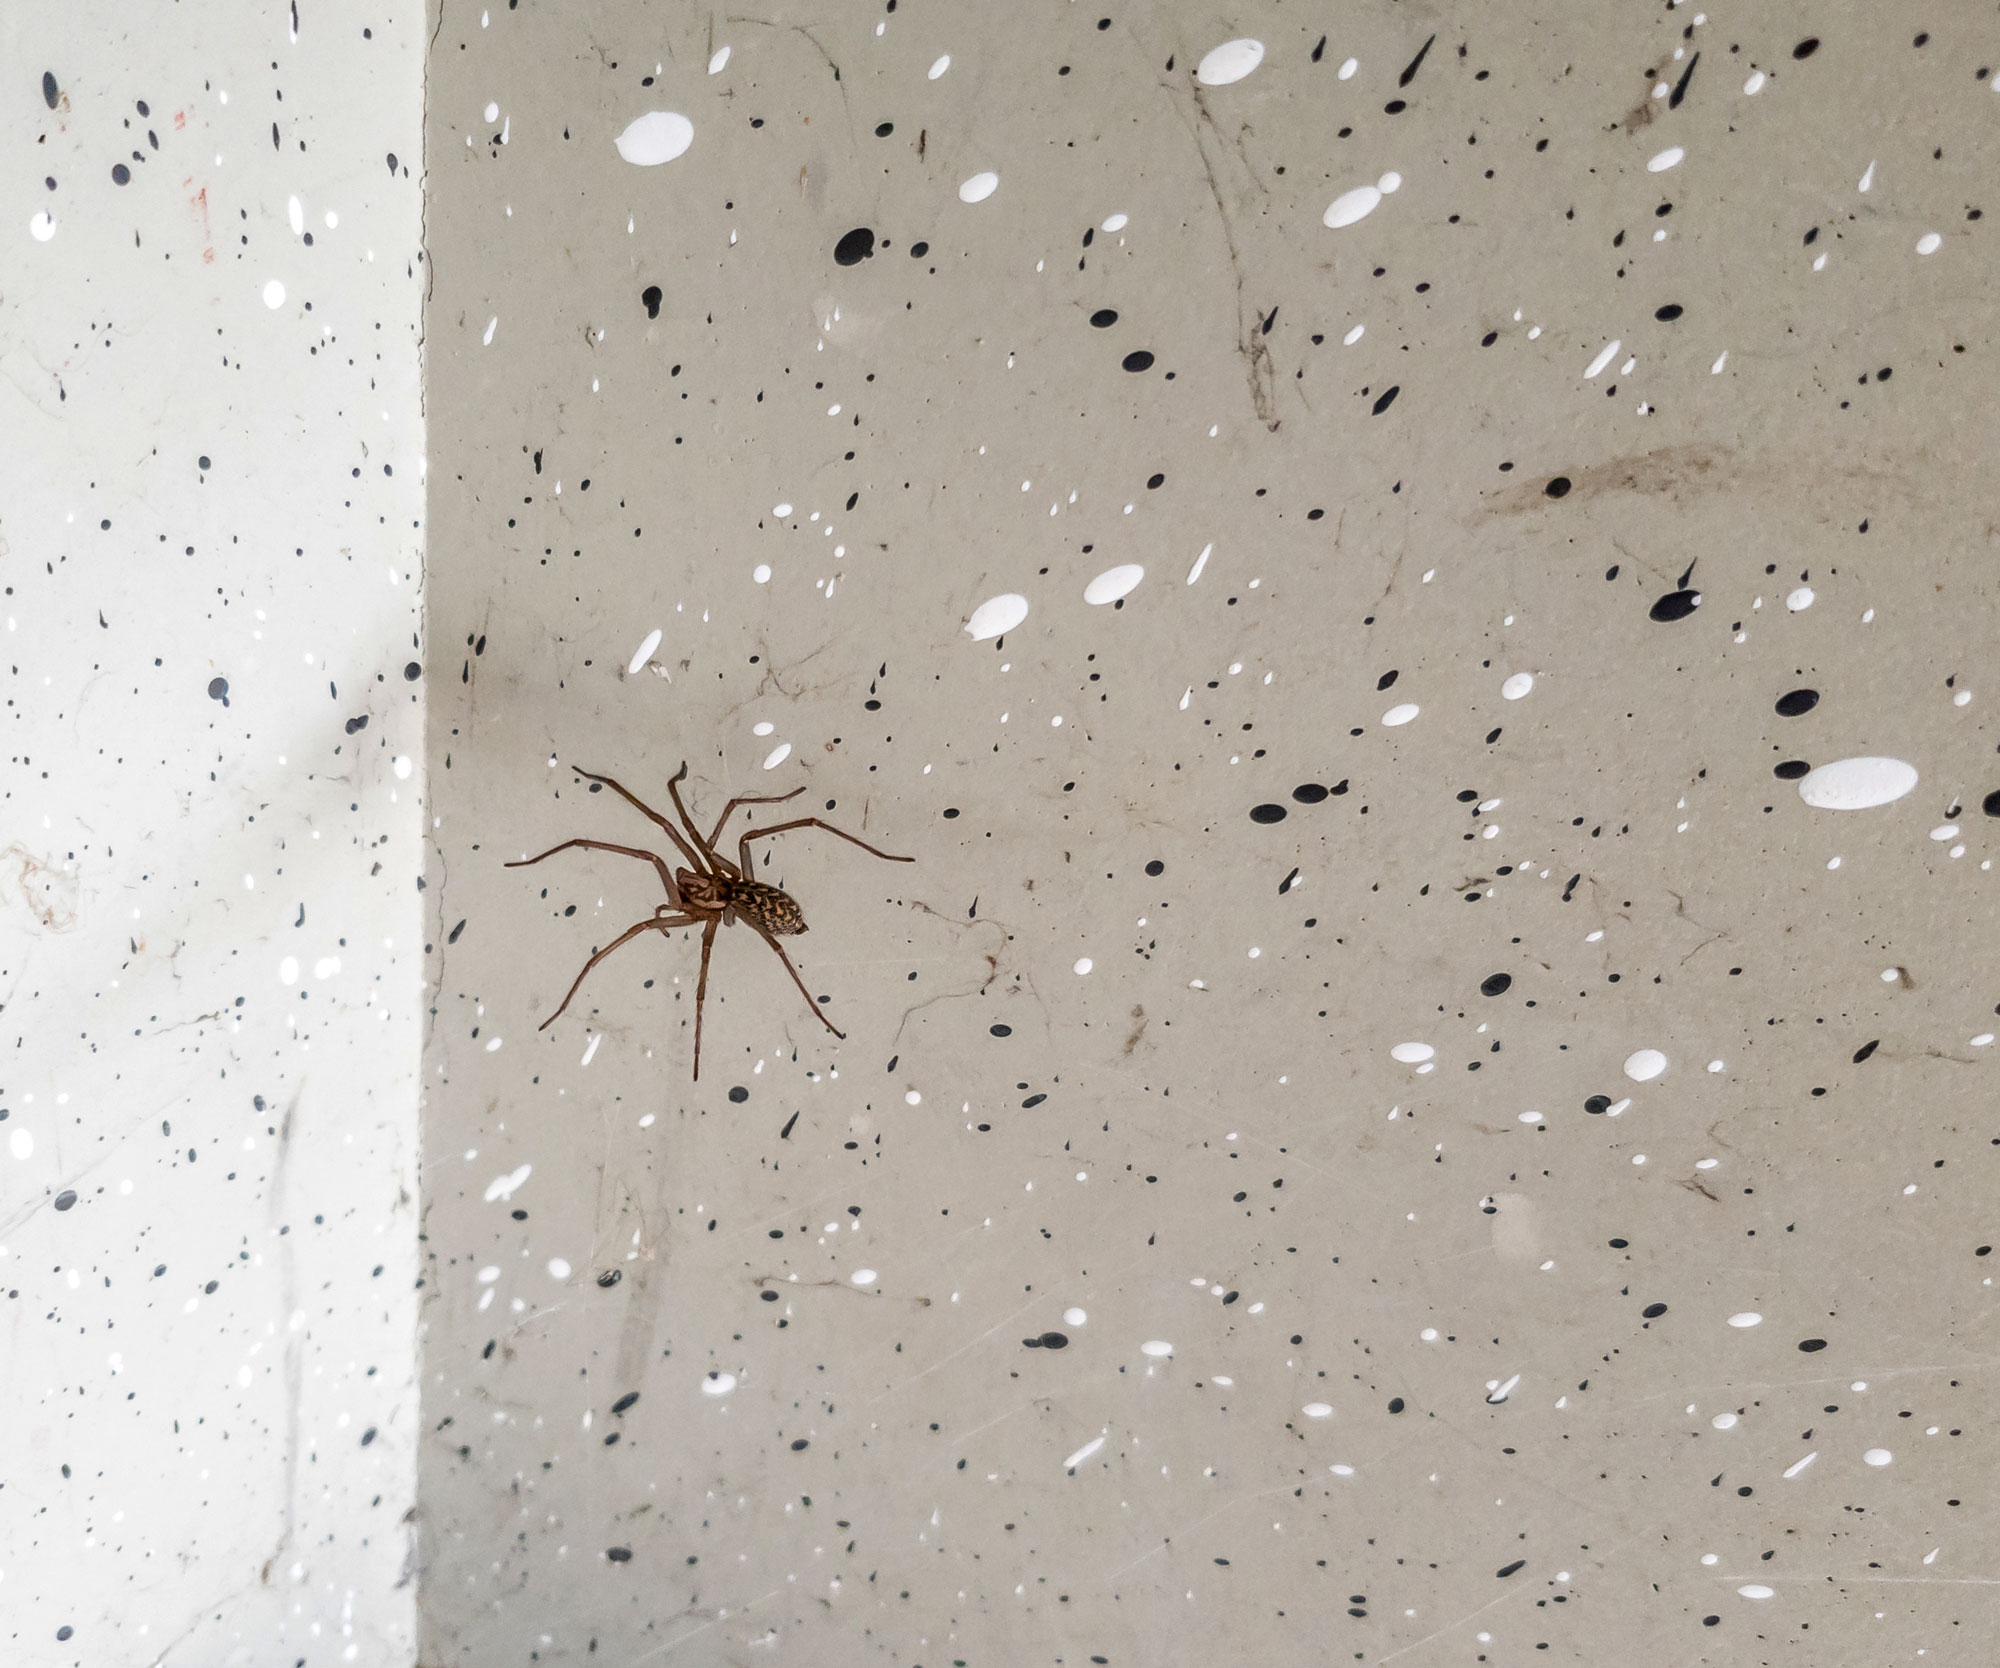 A house spider on the wall